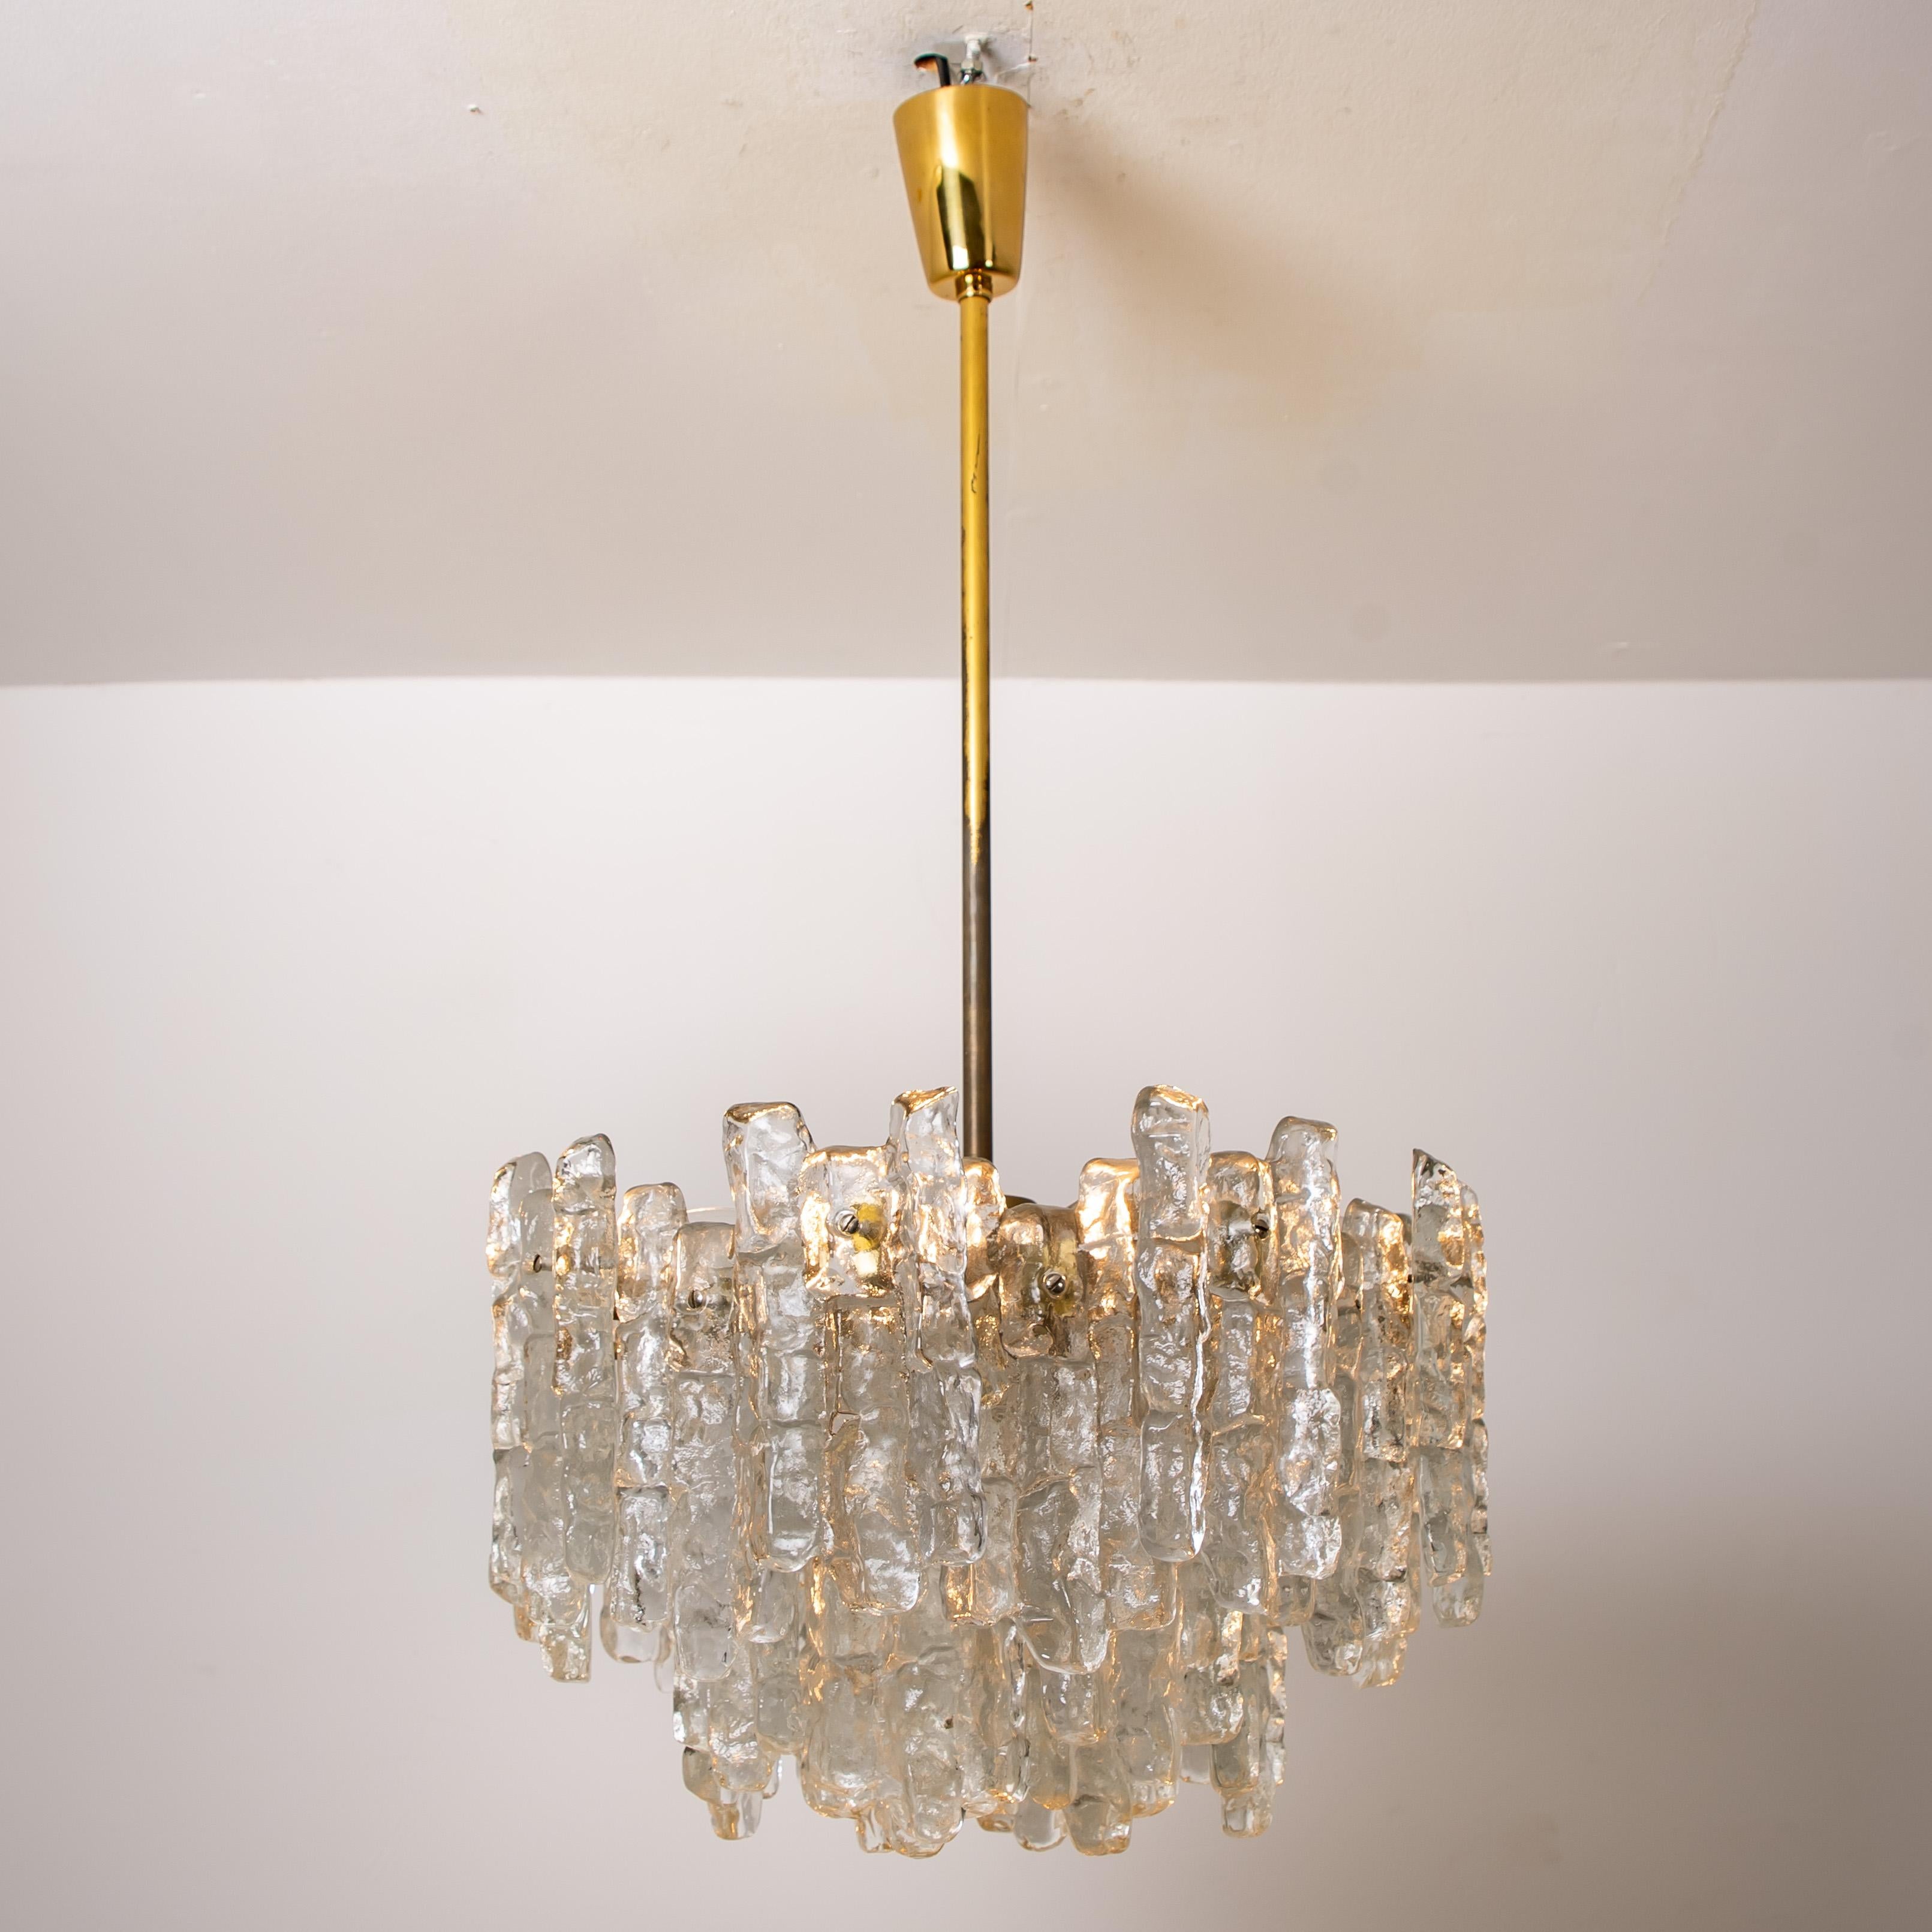 This modern brass brushed chandeliers, manufactured by Kalmar Austria in the 1970s, have eight E27 sockets and three layers of 28 textured solid ice glass sheets dangling from it. This unique chandeliers are not only functioning as light source but